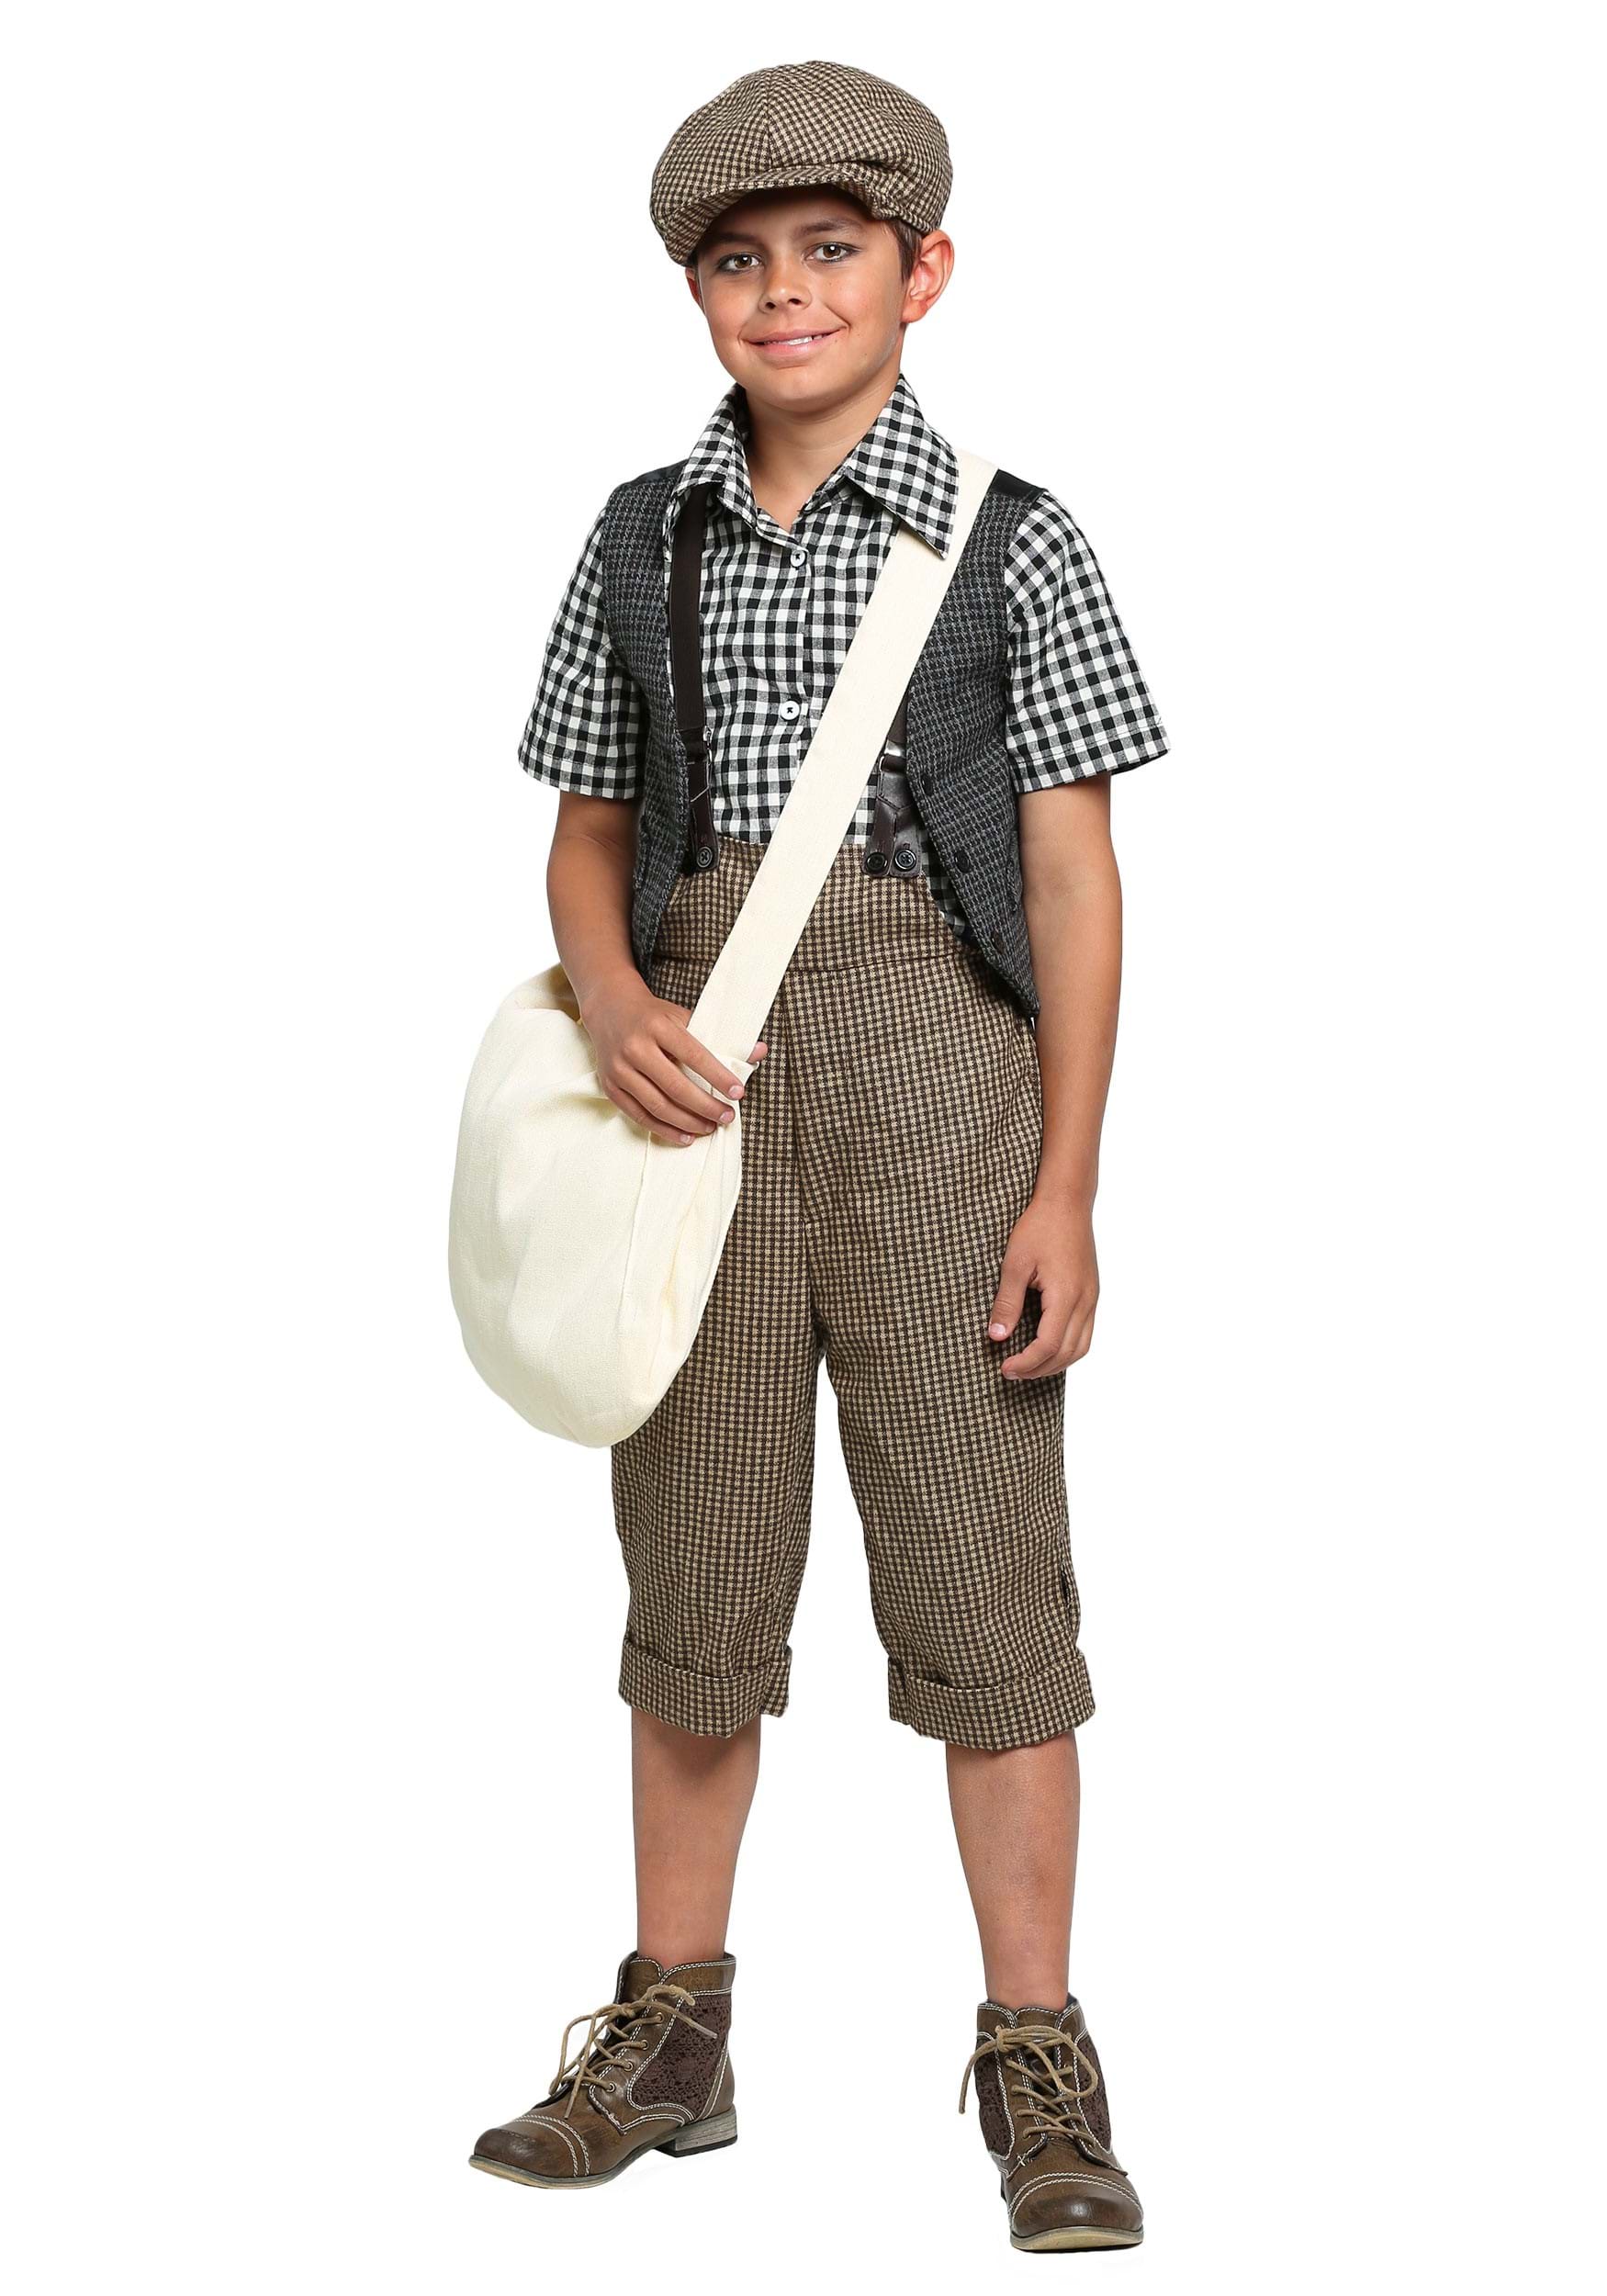 Photos - Fancy Dress FUN Costumes Kid's 20s Newsie Costume | Exclusives | Made By Us Black/